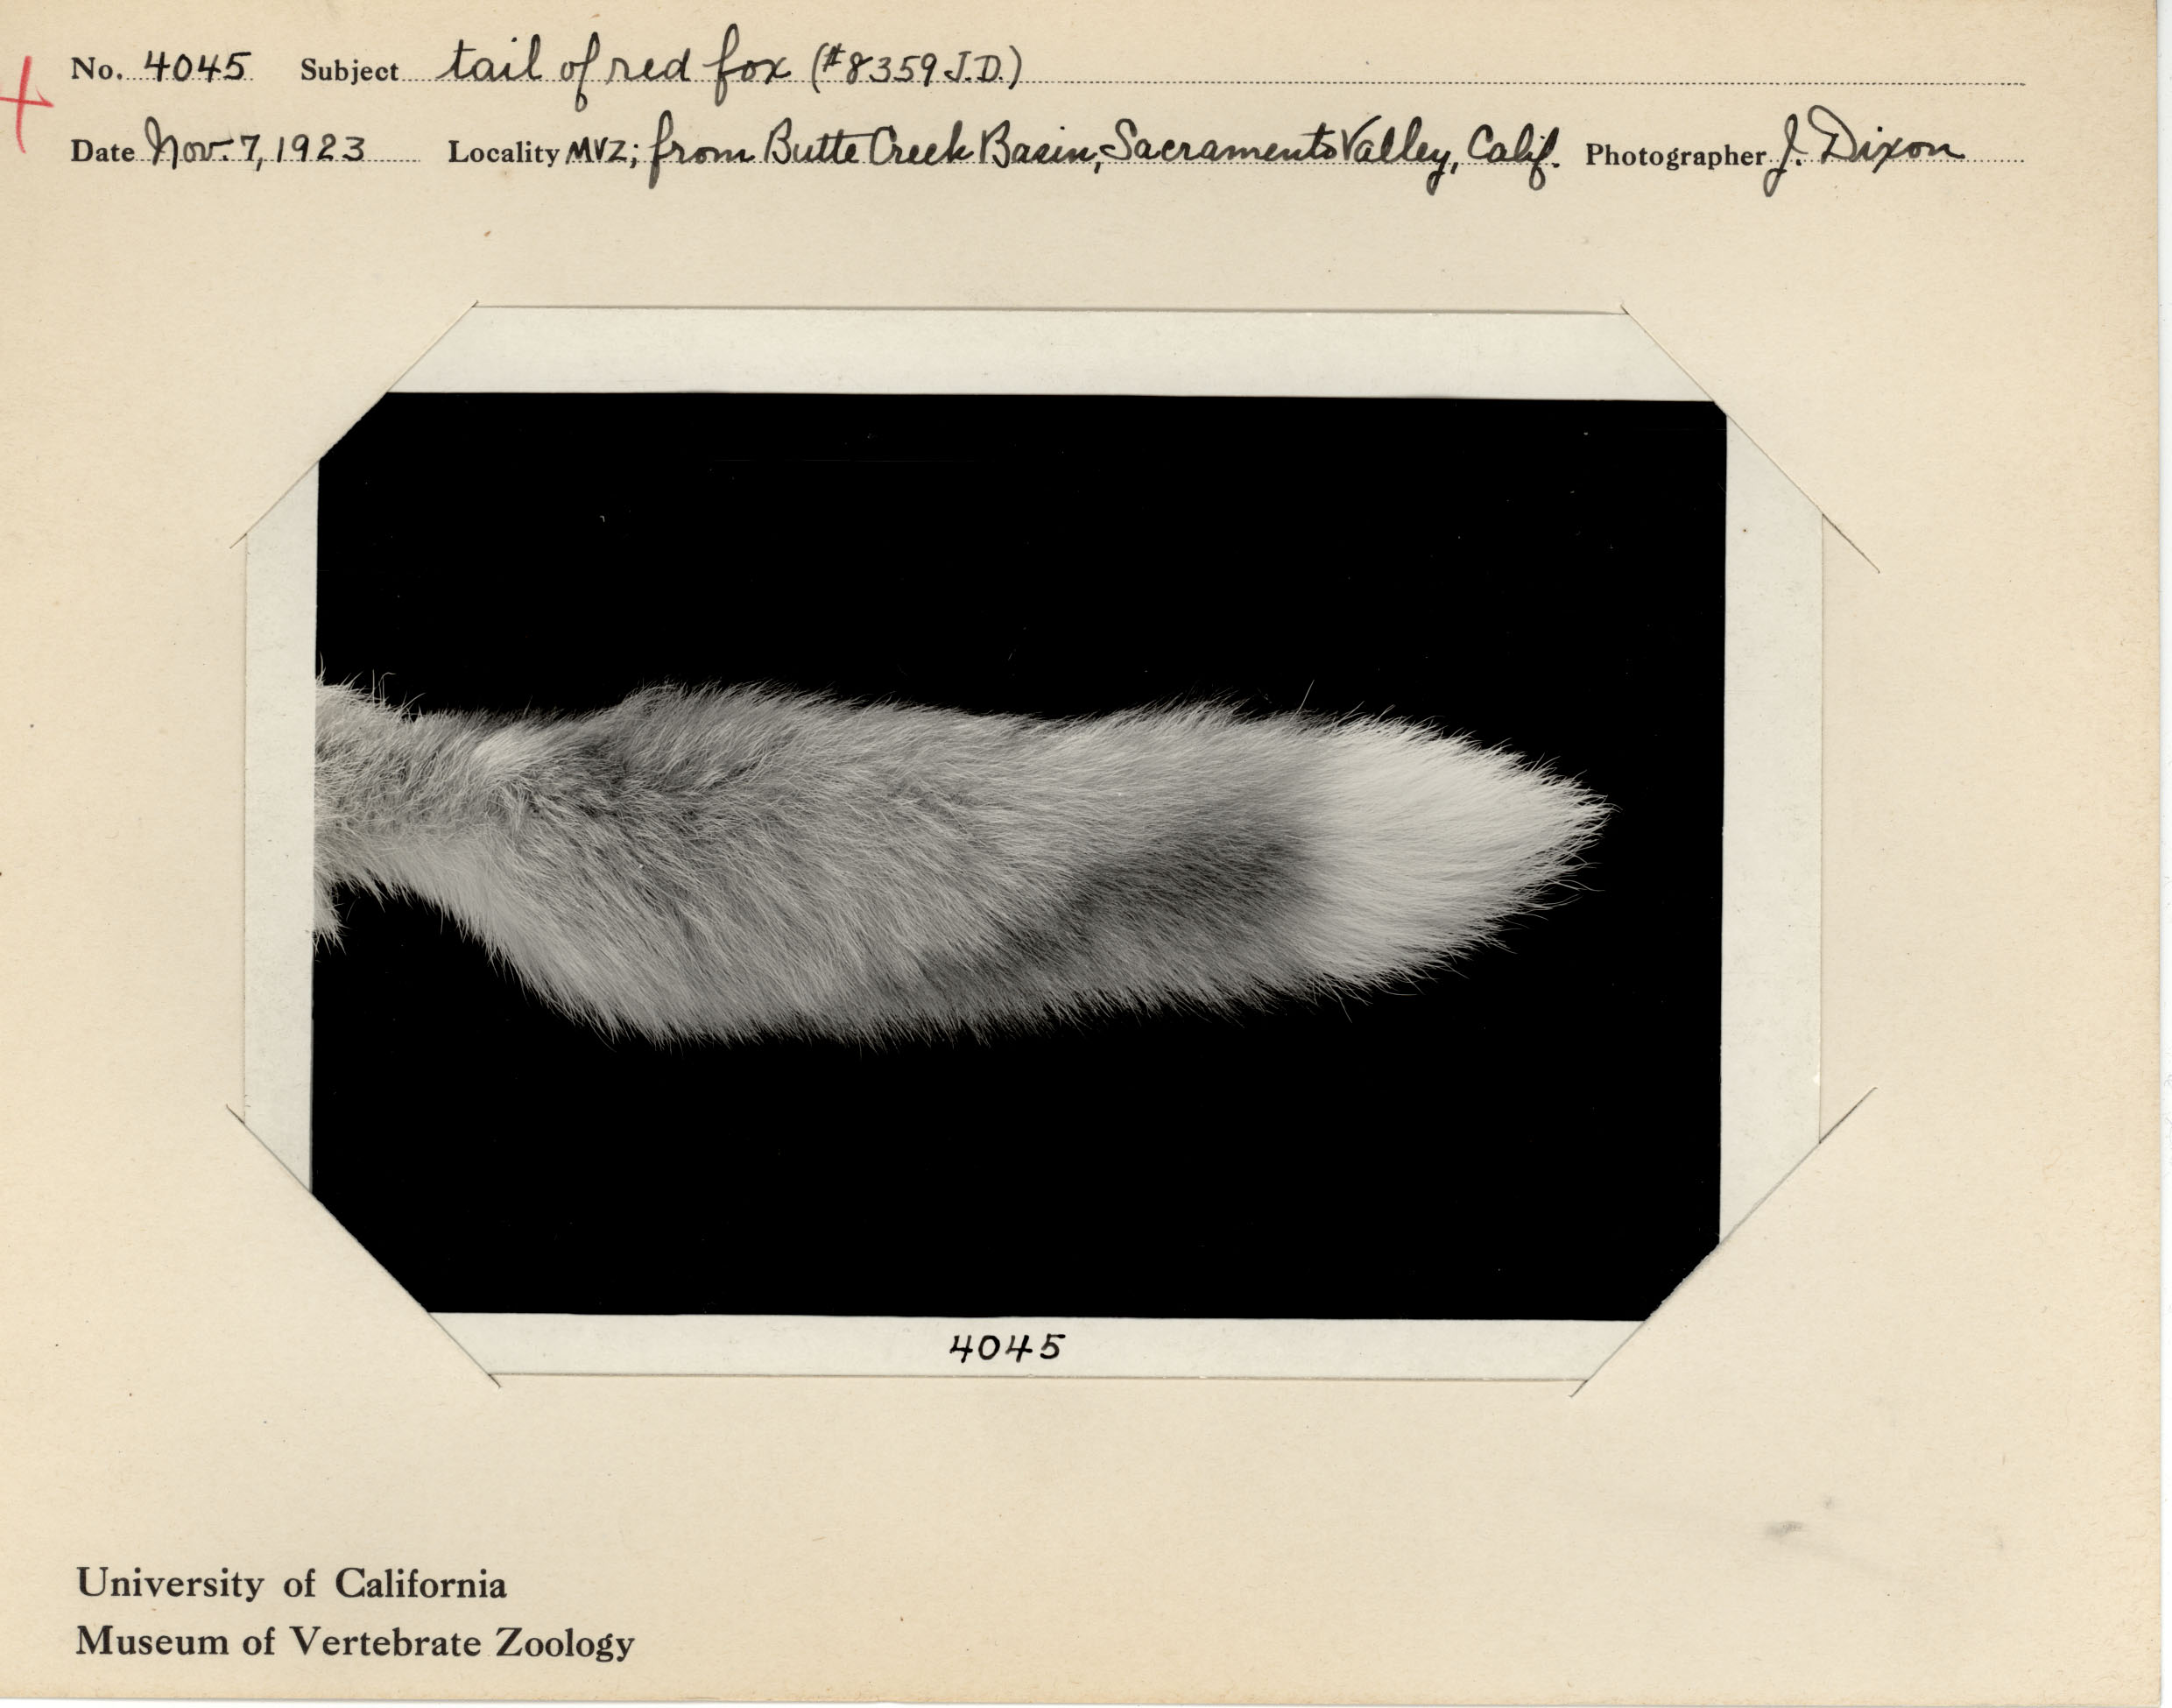 “Tail of red fox,” November 7, 1923, photographed by Joseph Dixon, MVZ Image No. 4045.